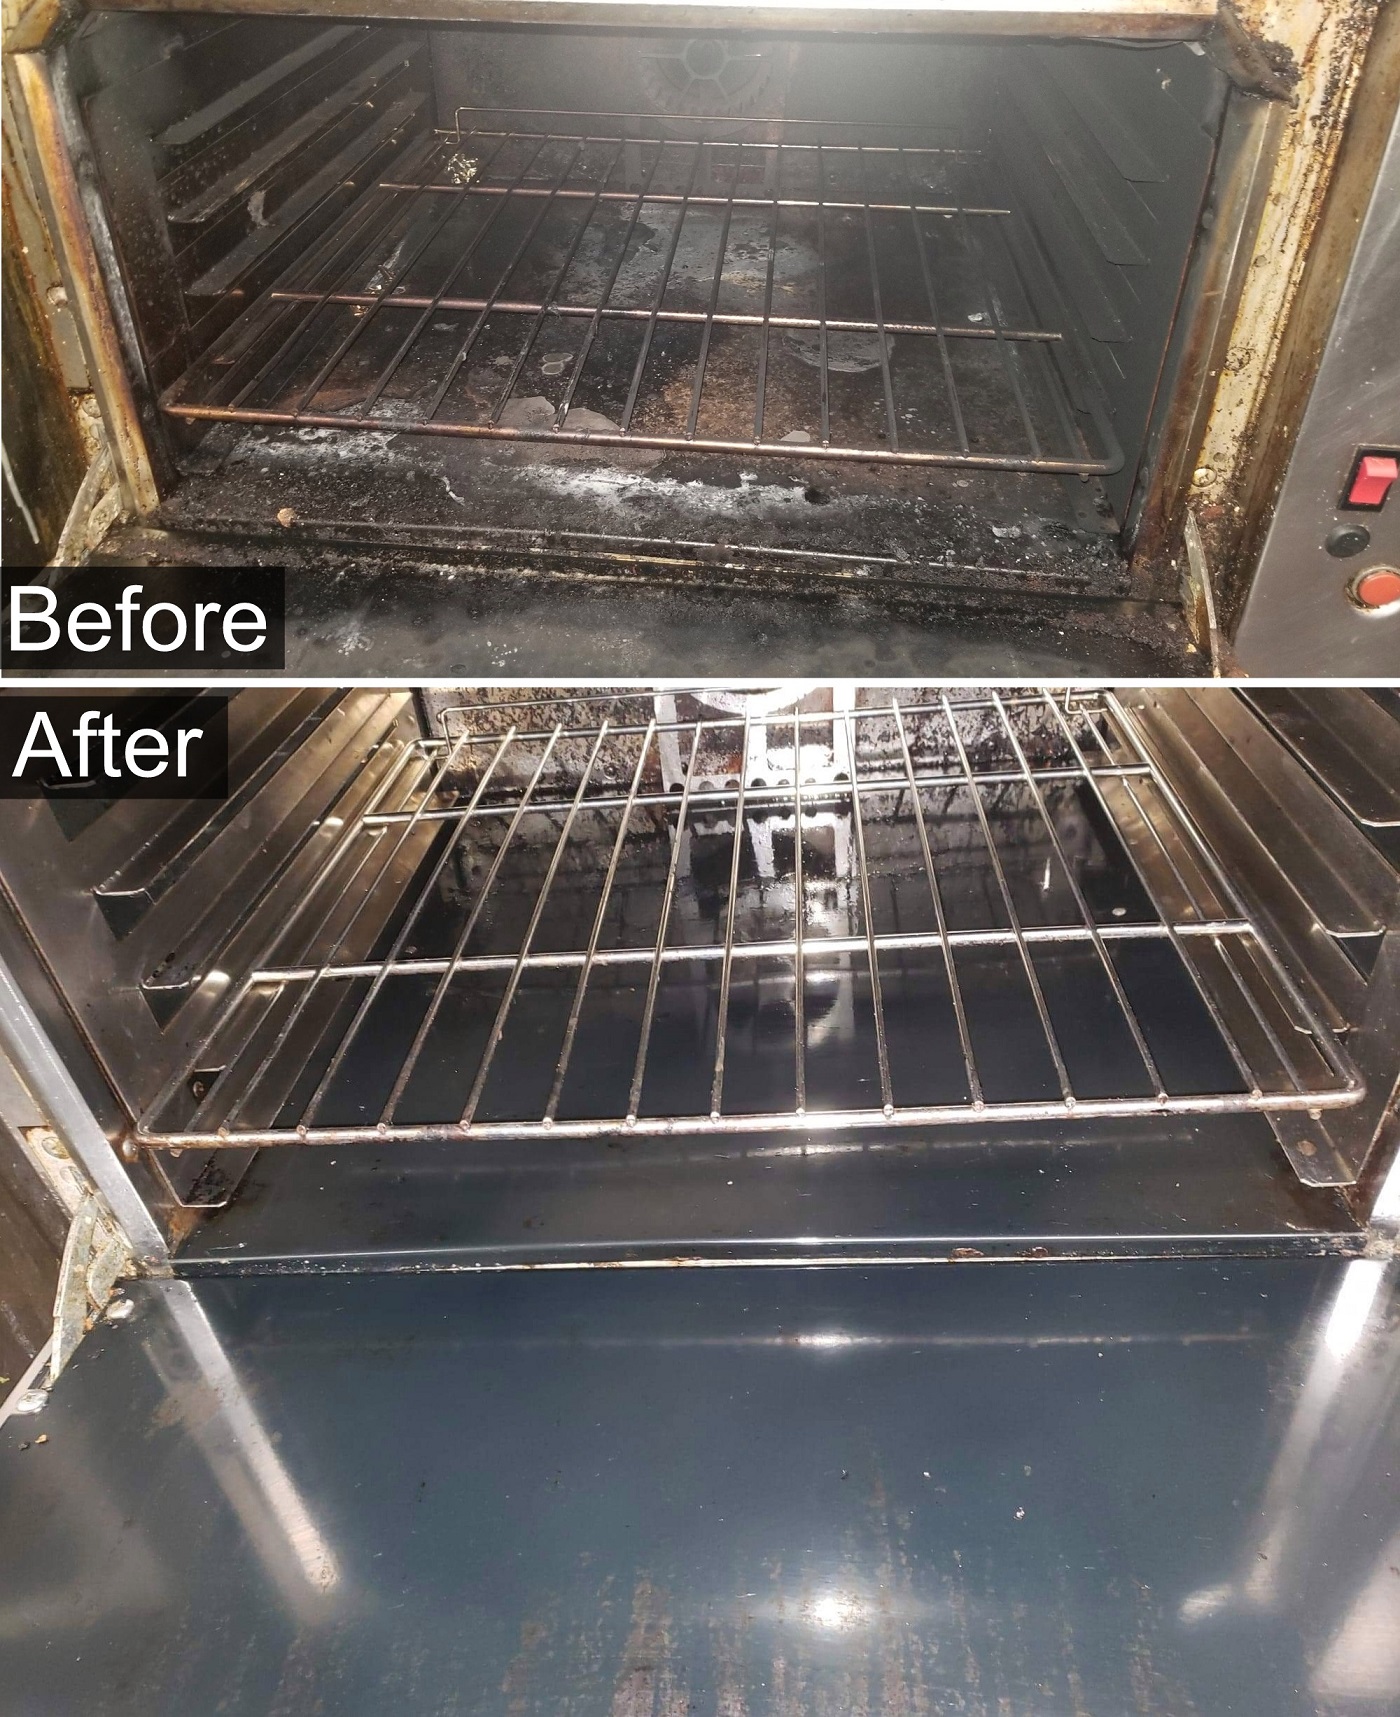 San Diego, CA Restaurant Oven Cleaning Company